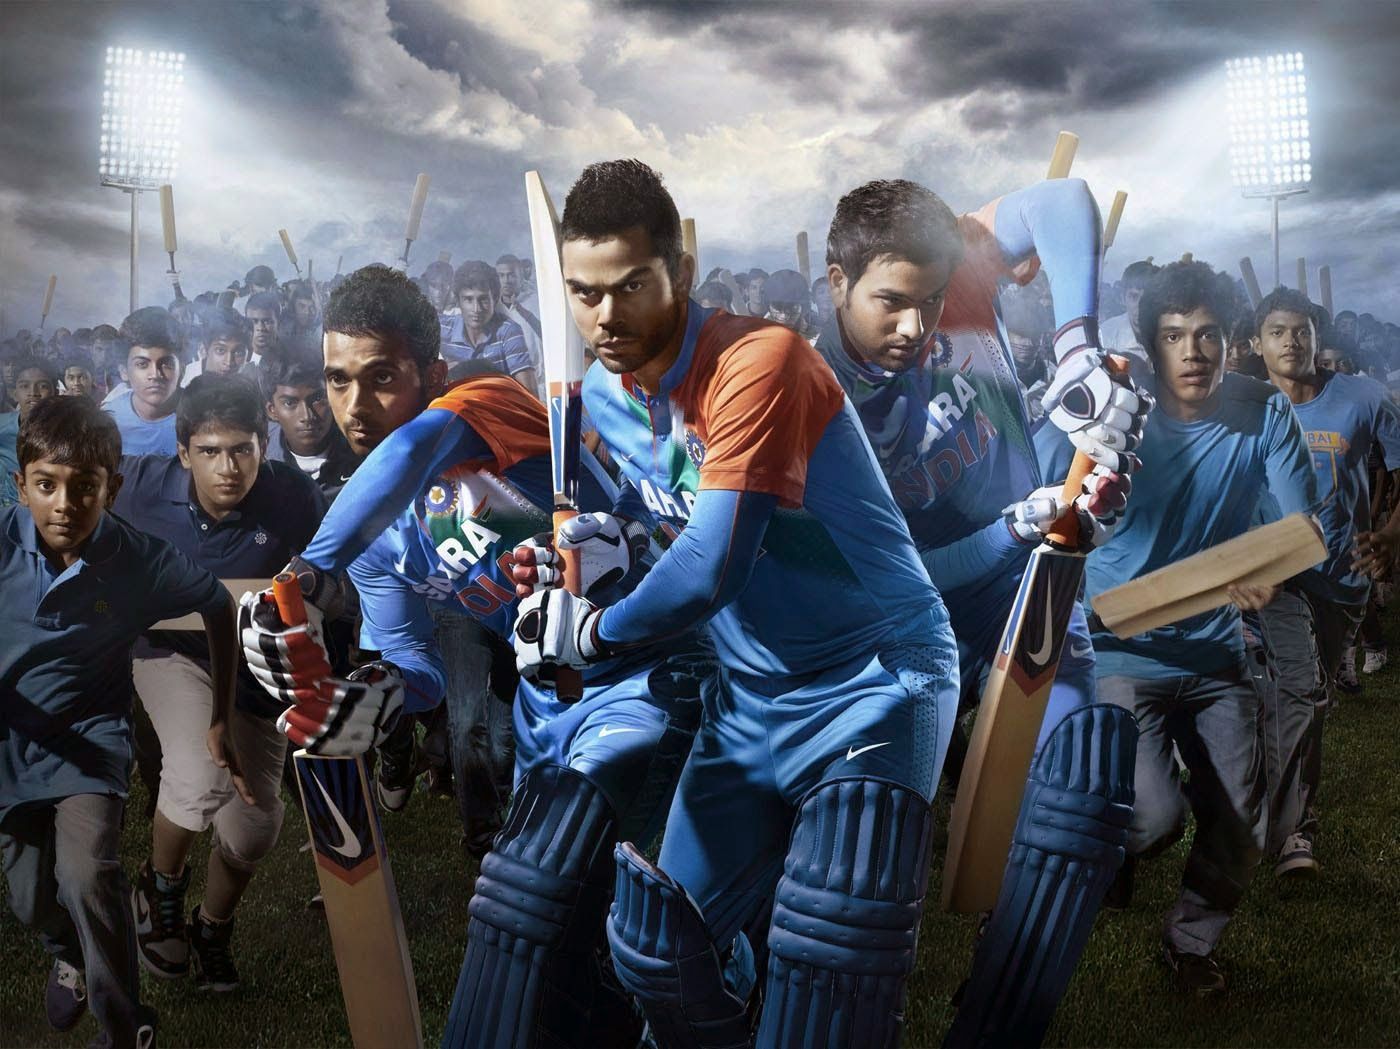 12 latest india cricket team wallpapers and photosThe Cricket